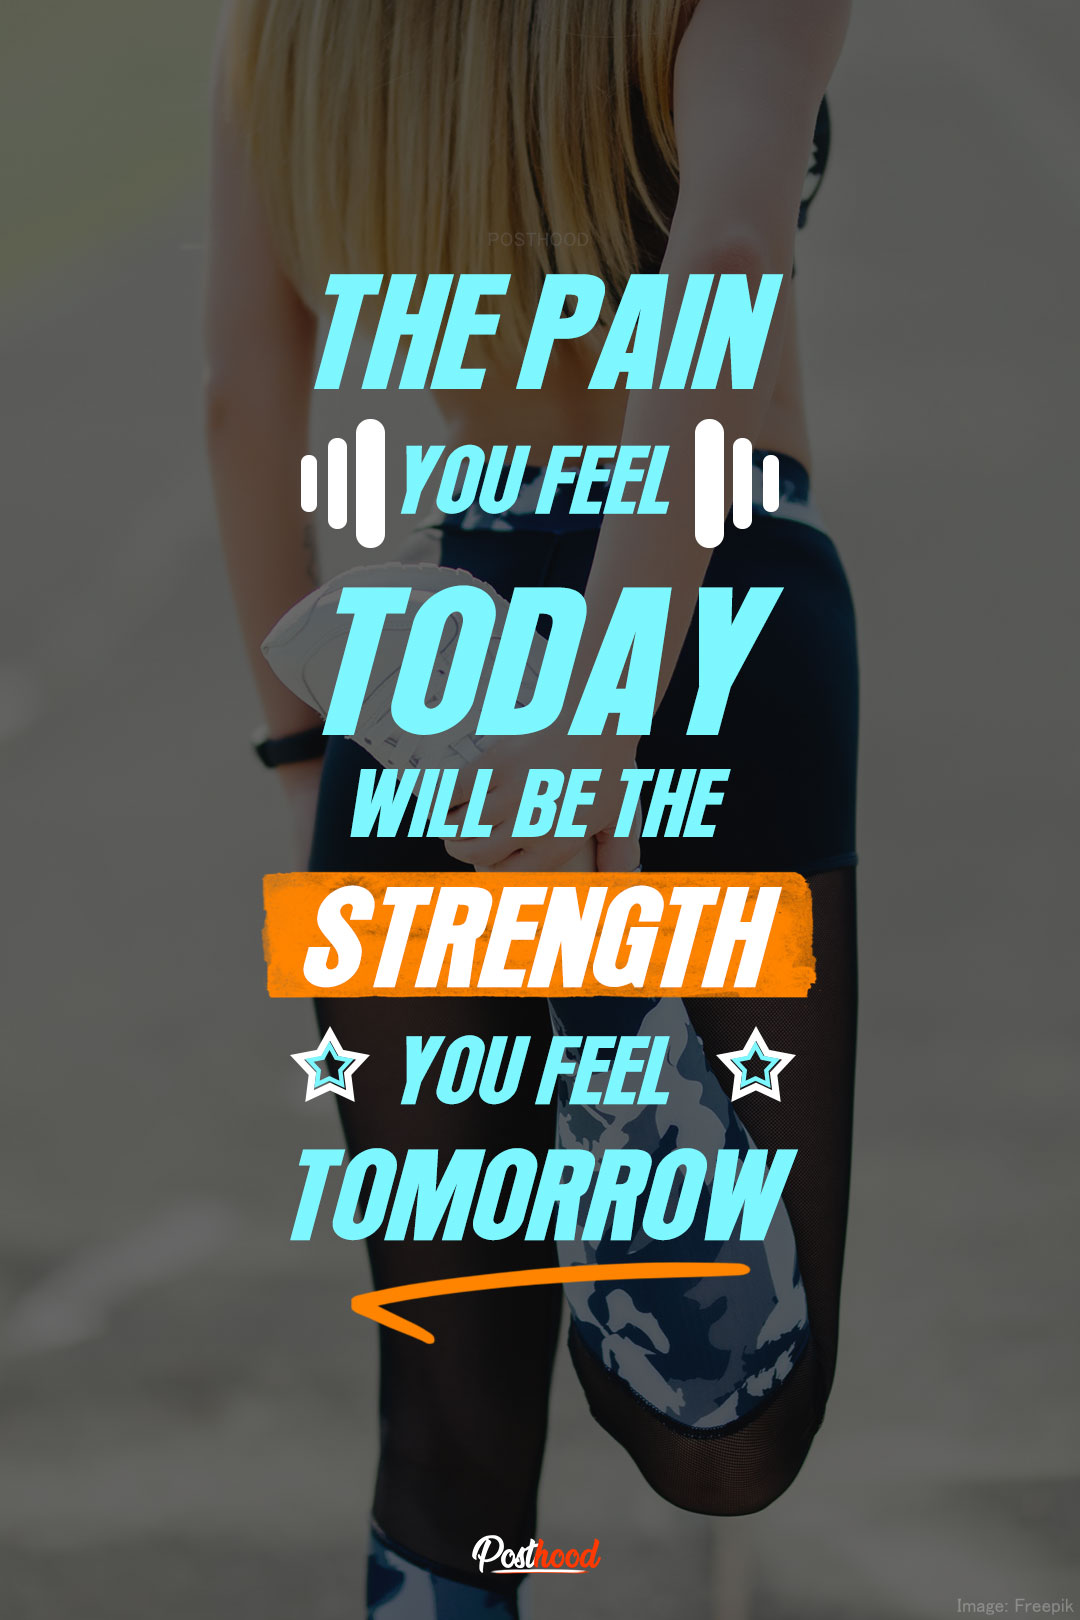 Inspirational gym quotes, Workouts quotes, fitness quotes, Printable gym wallpaper, Inspirational Wallpapers for mobile.